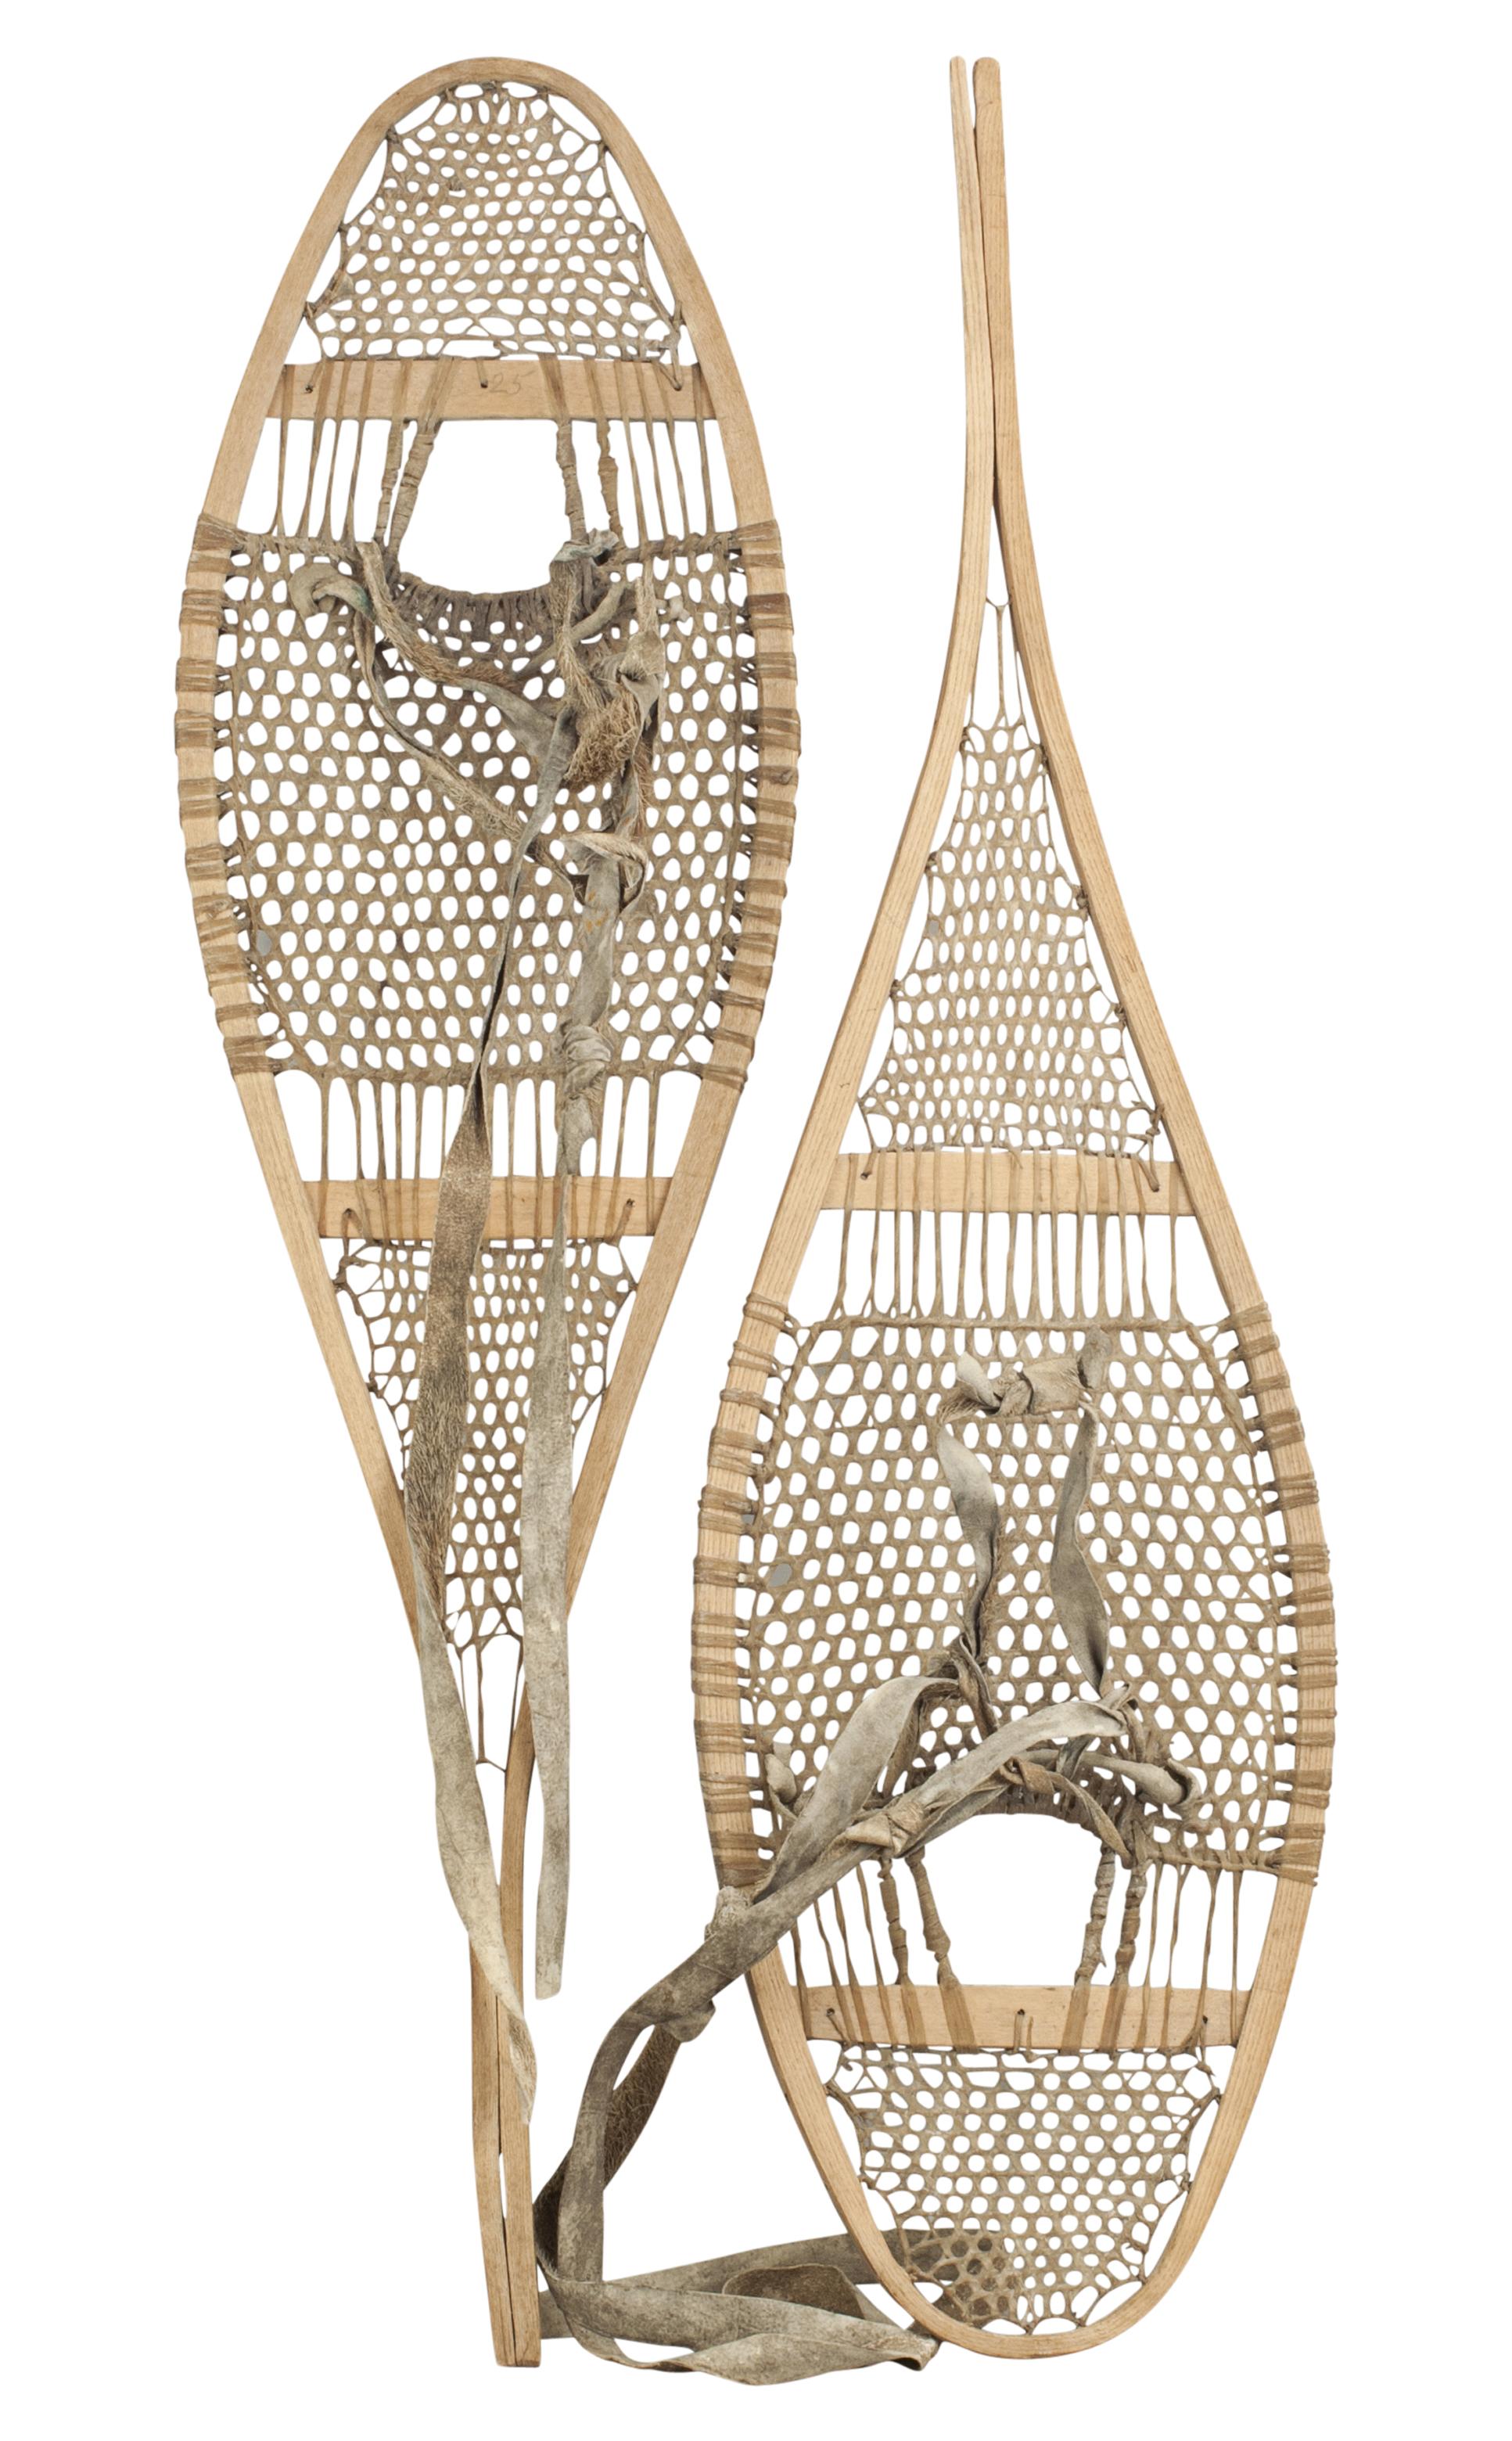 An attractive and outstanding pair of snow shoes constructed from bent hickory frames with stretchers and interlaced gut supports. The snow shoes are in great original condition with reindeer skin boot ties.

Snowshoes were a common form of